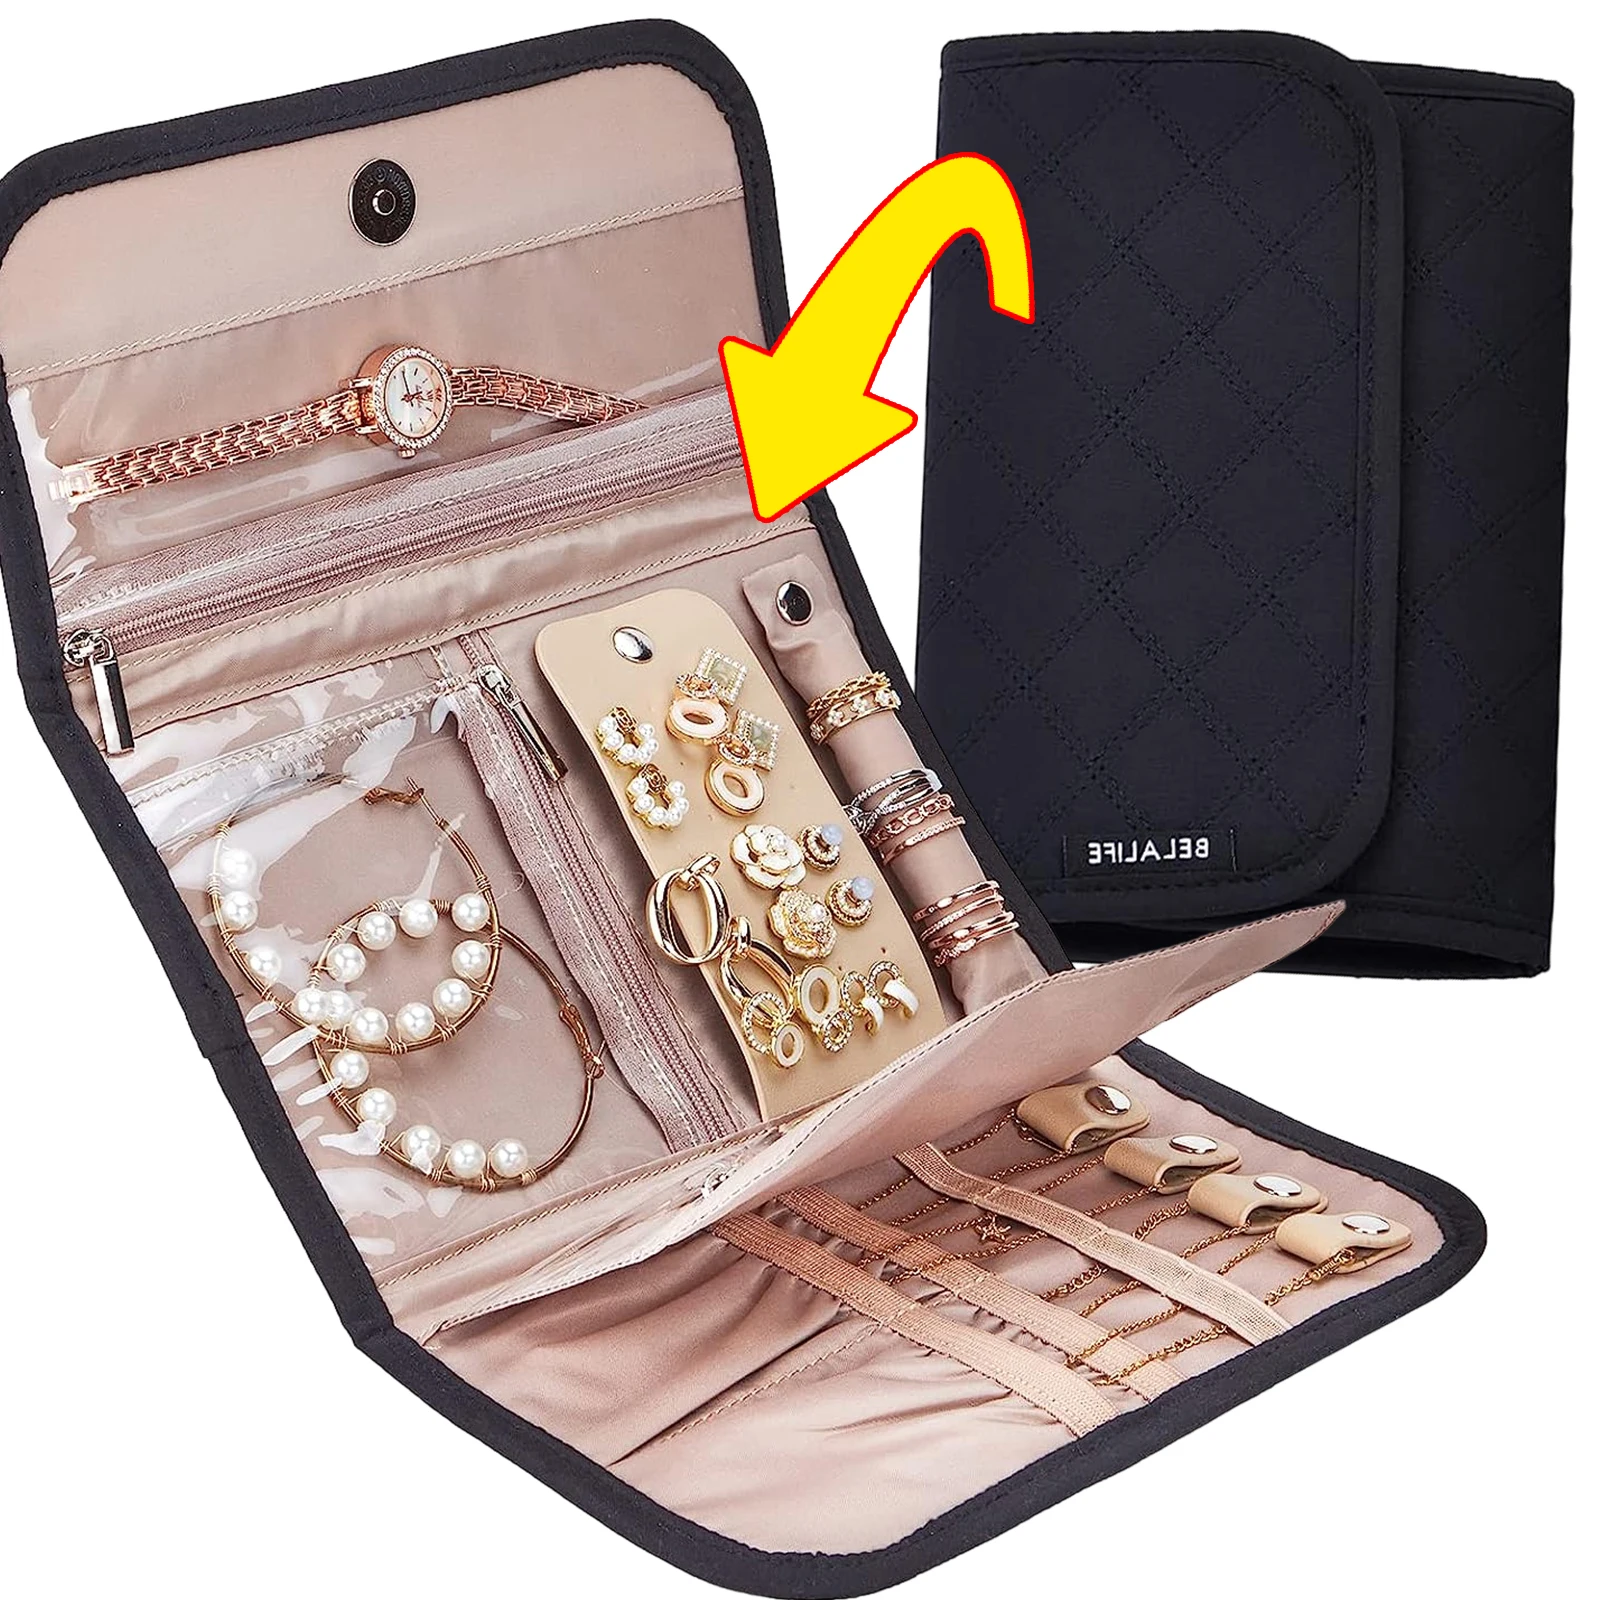 Roll Foldable Jewelry Case Travel Jewelry Organizer Portable for Journey Earrings Rings Diamond Necklaces Brooches Storage Bag